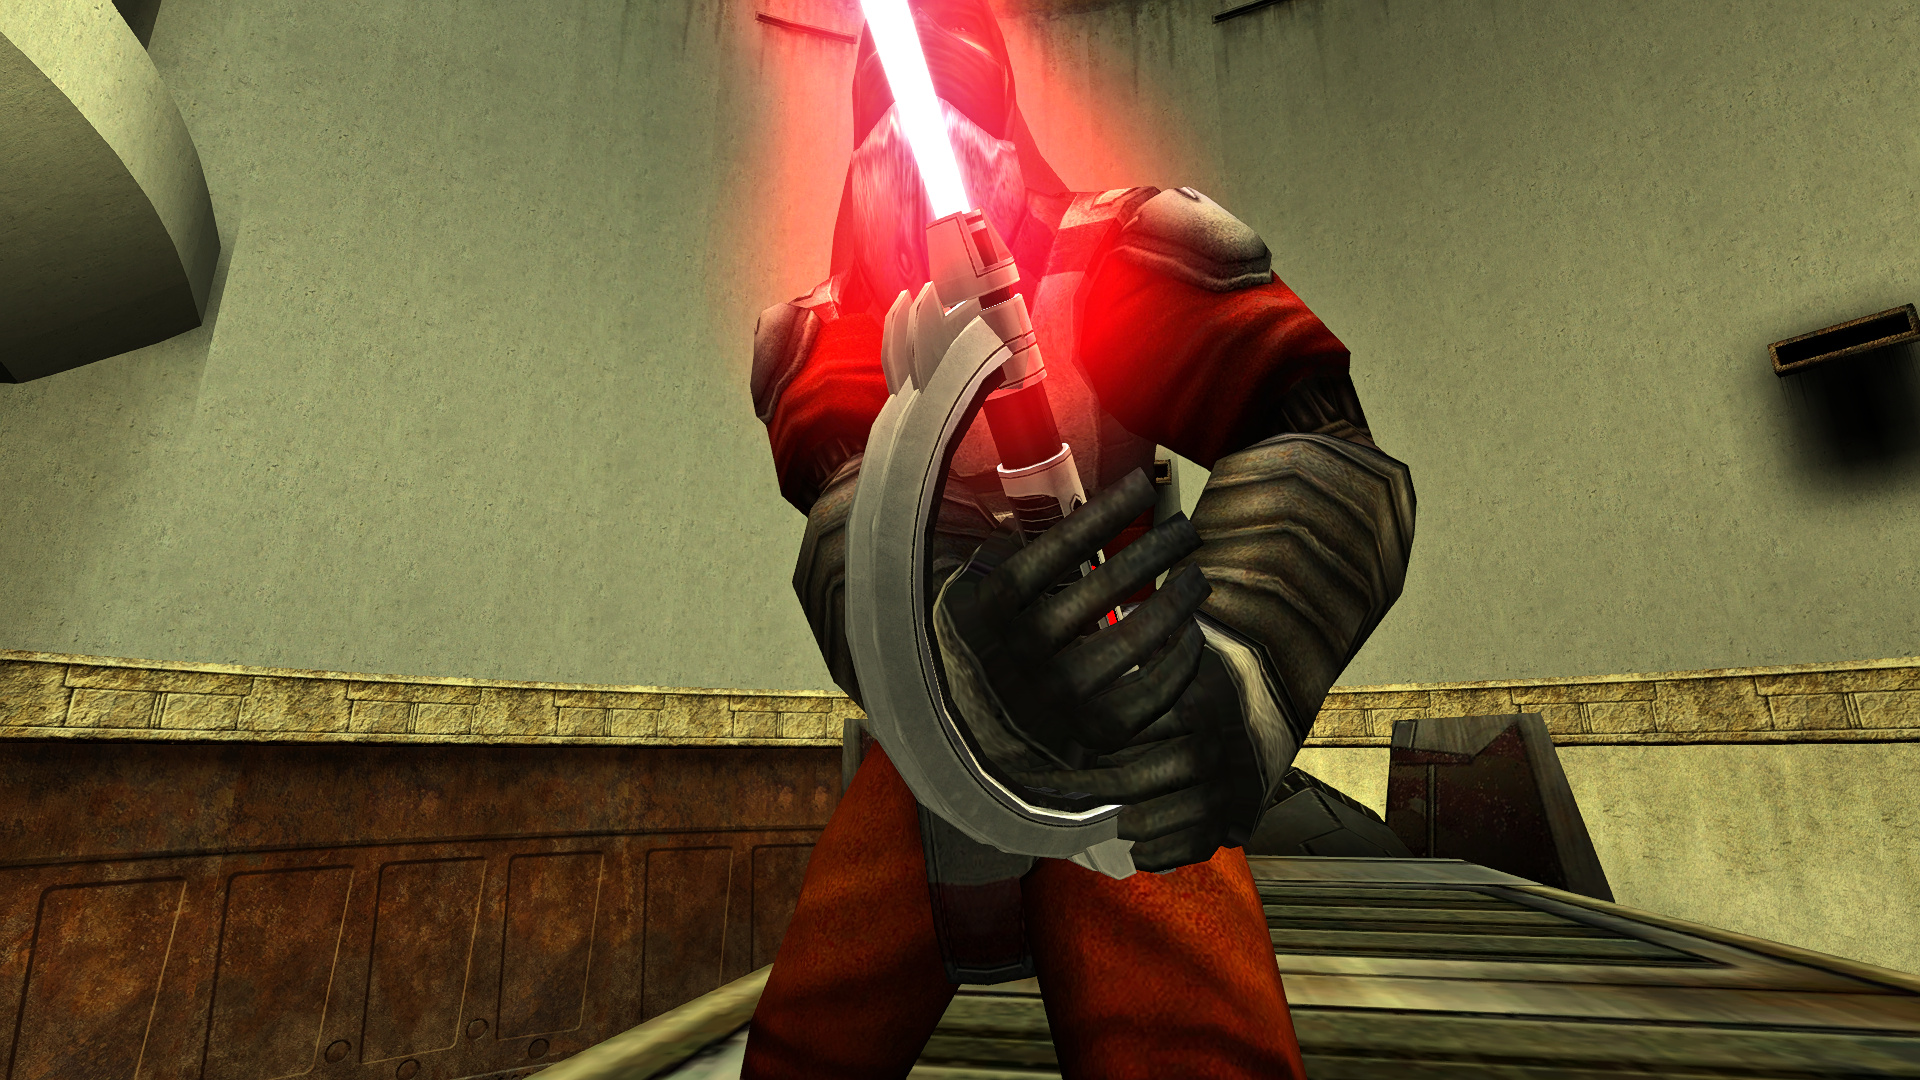 More information about "Inquisitor's Lightsaber"